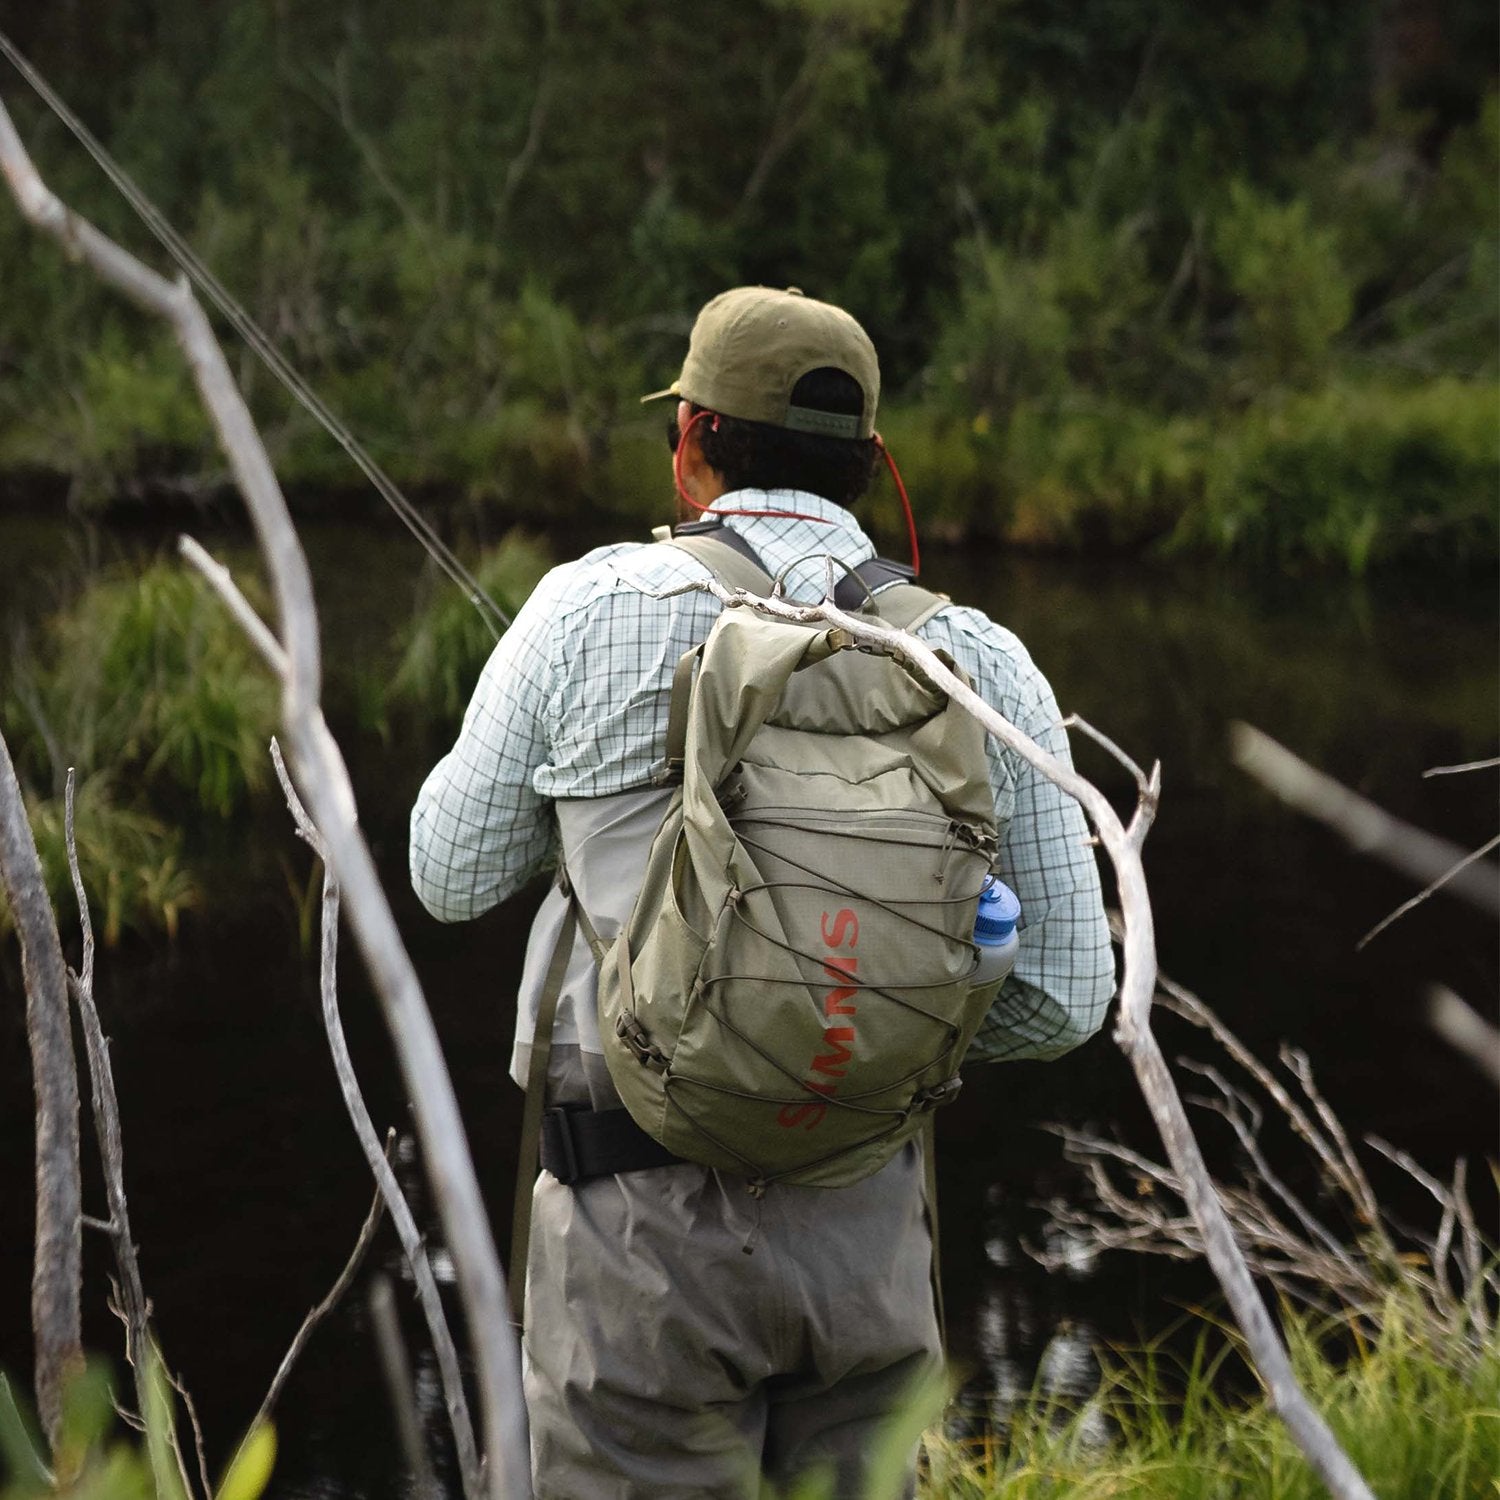 fly fishing backpacks, fly fishing backpacks Suppliers and Manufacturers at